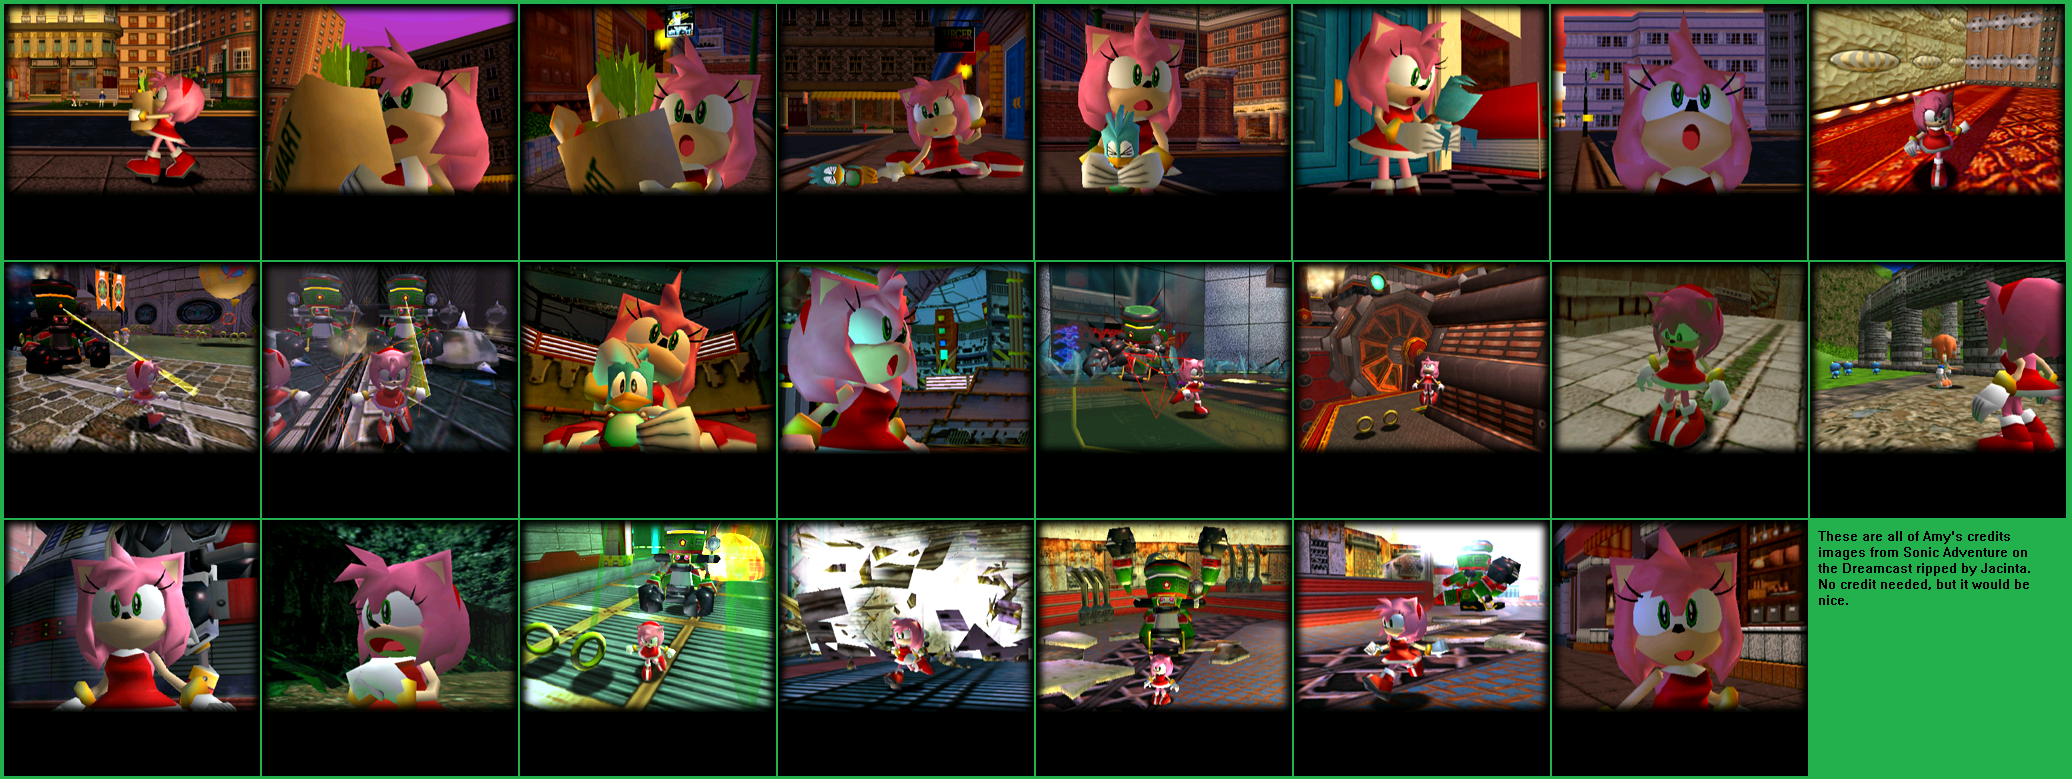 Sonic Adventure - Credits Images (Amy)